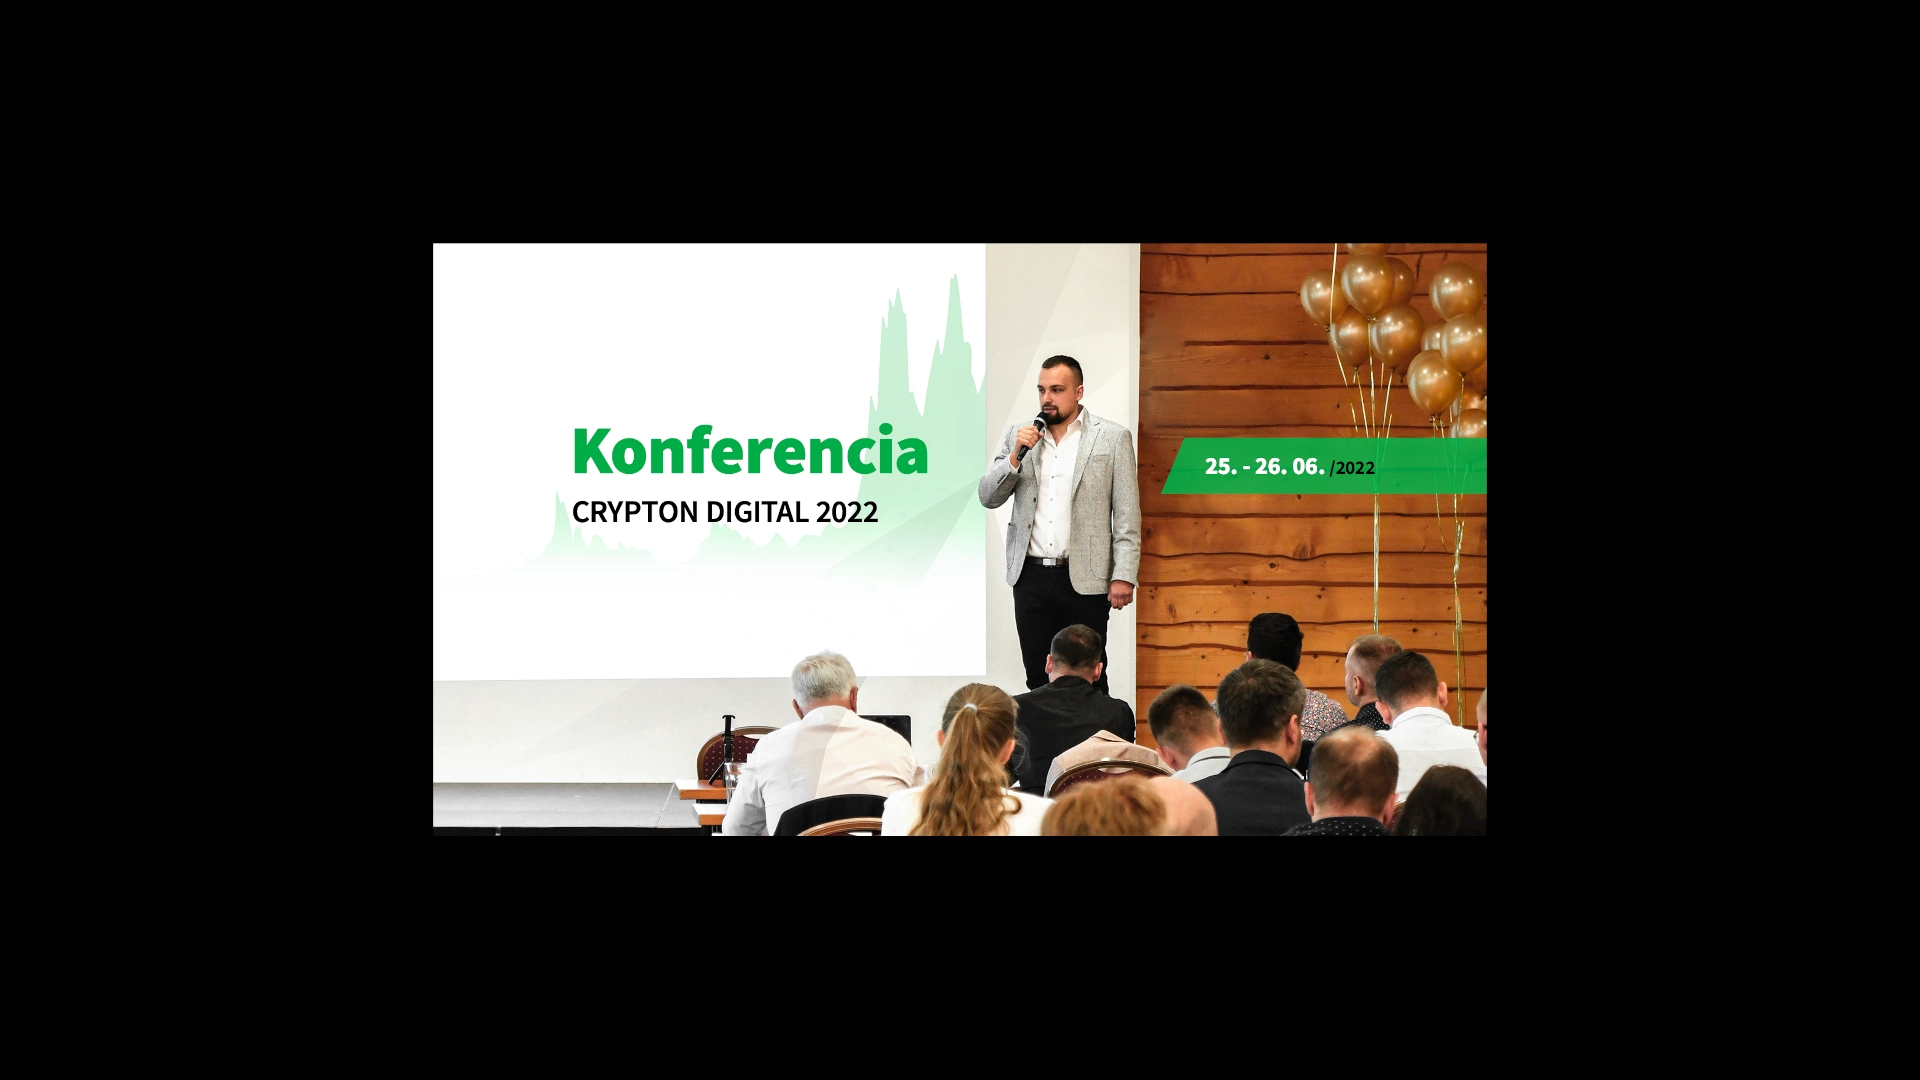 Conference Background Image